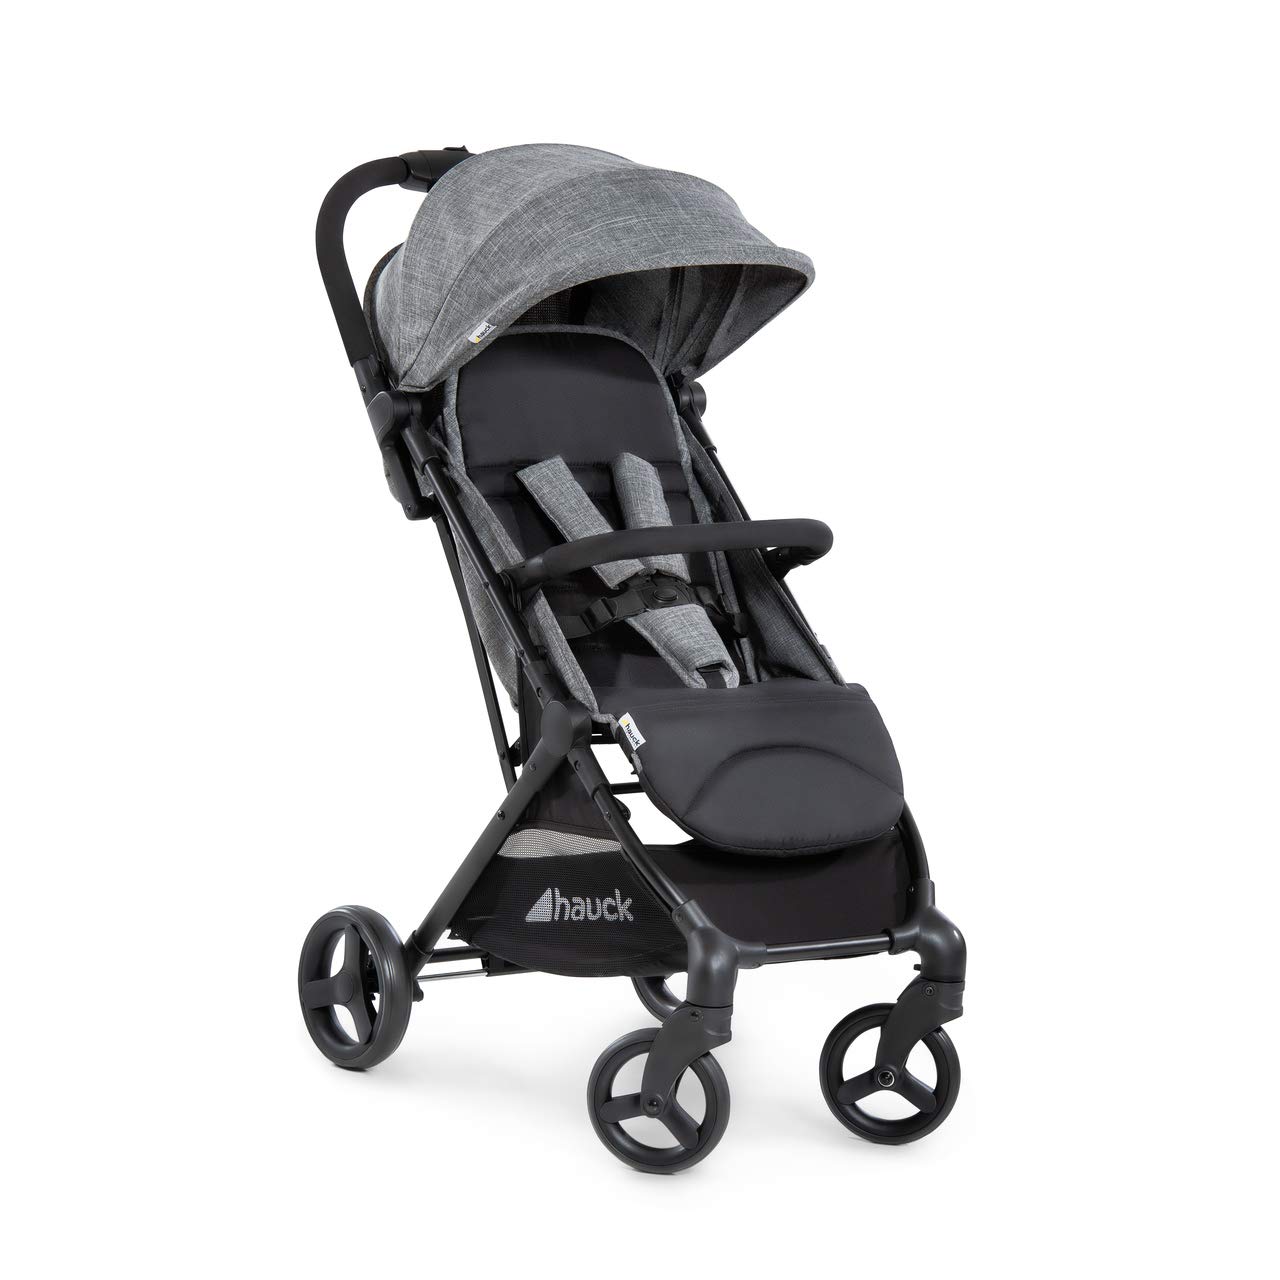 Hauck Sunny Travel Buggy / Ultra Light / One-Hand Foldable / Super Compact Folding Size / Ventilation Window / Maximum Load 25 kg / with Reclining Position / Large Basket / Black / Grey